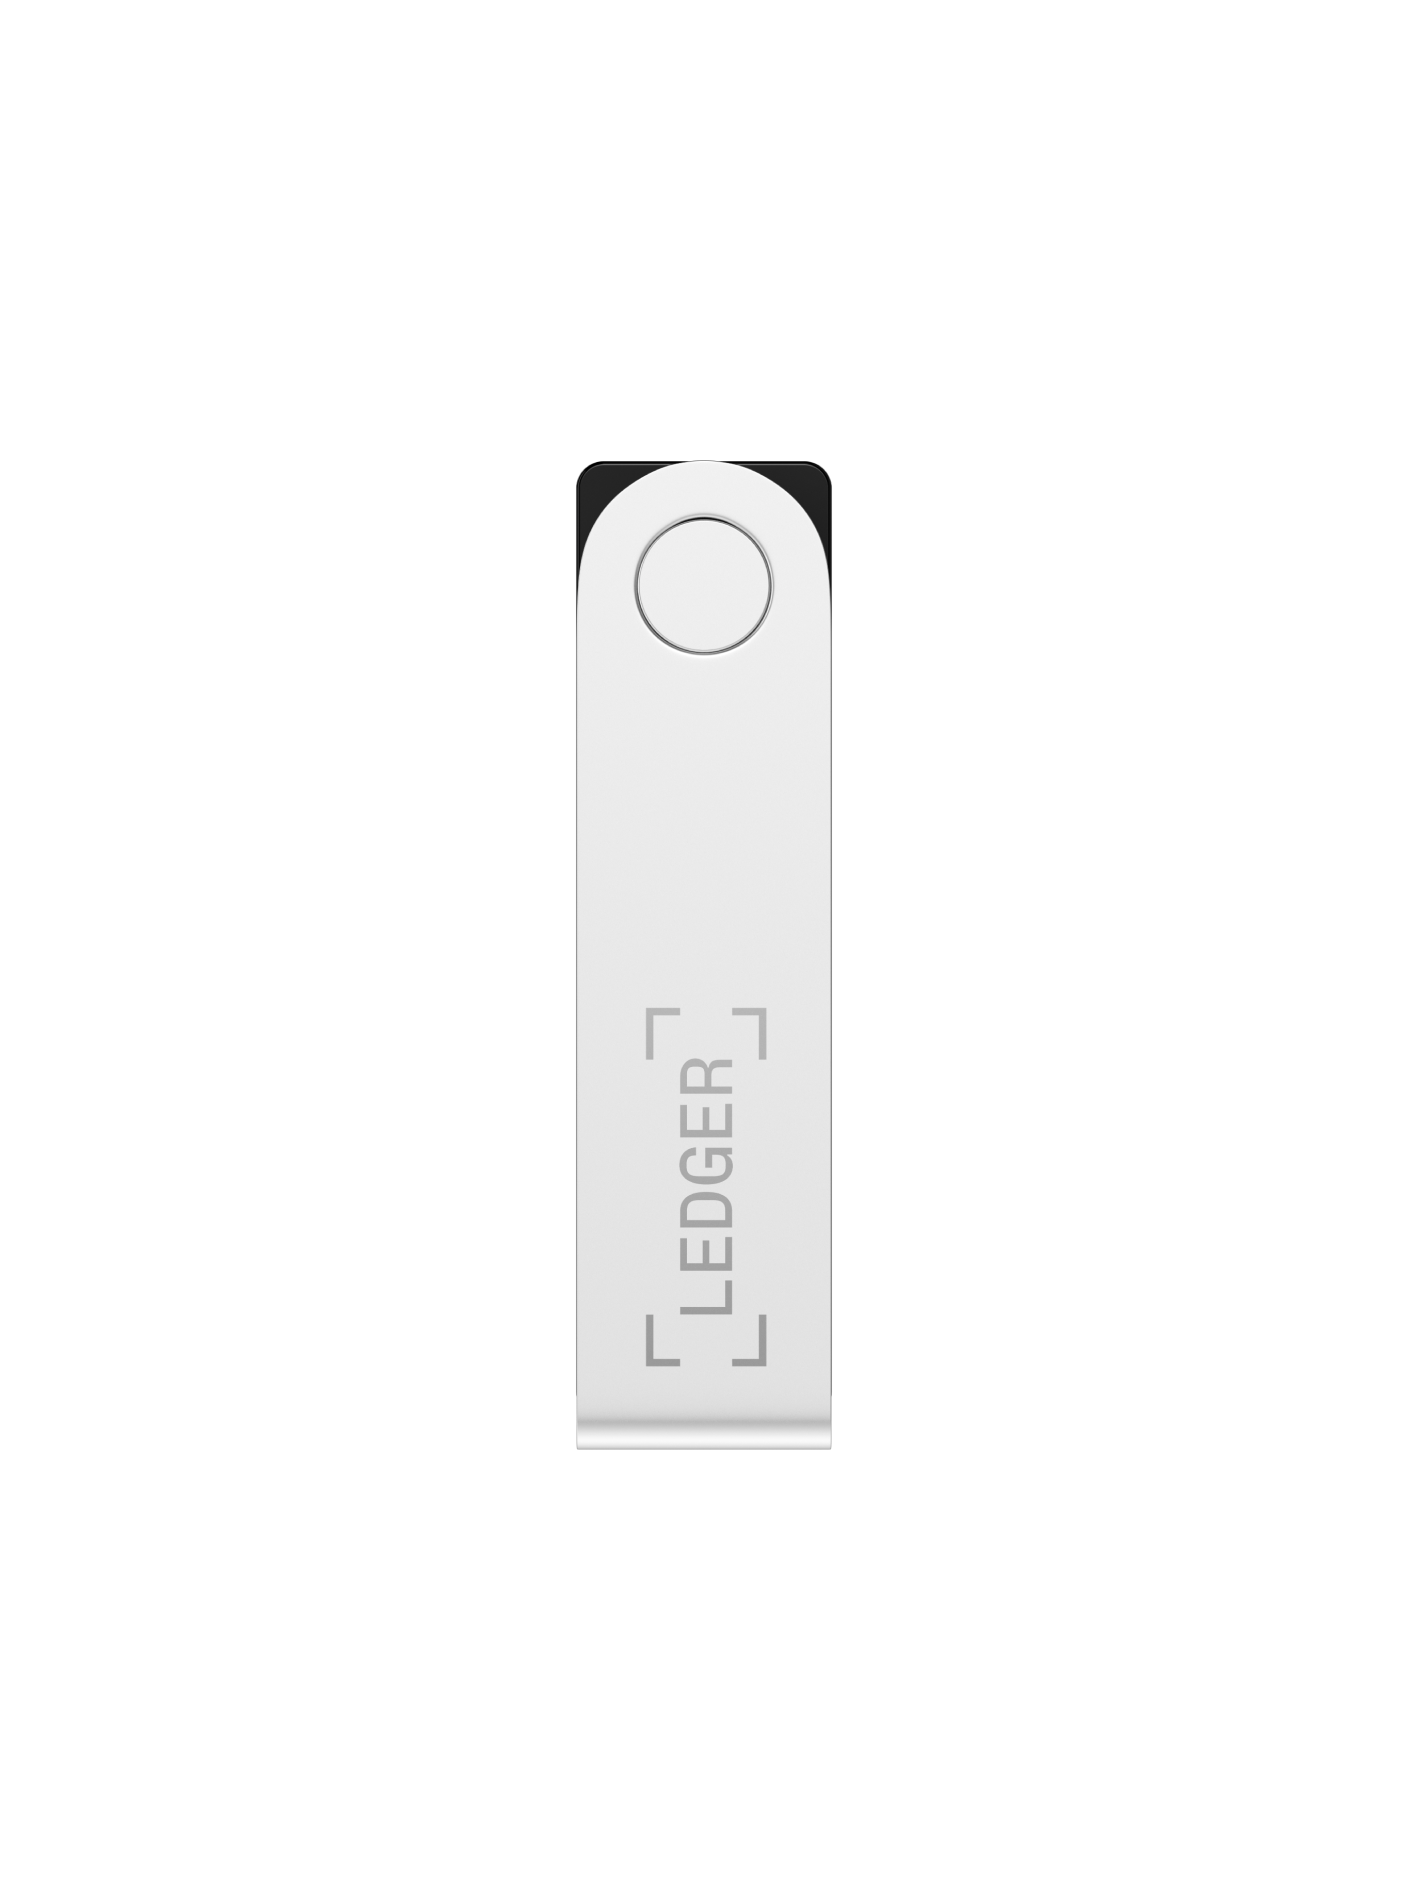  Ledger Nano X Crypto Hardware Wallet - Bluetooth - The Best Way  to securely Buy, Manage and Grow All Your Digital Assets : Electronics